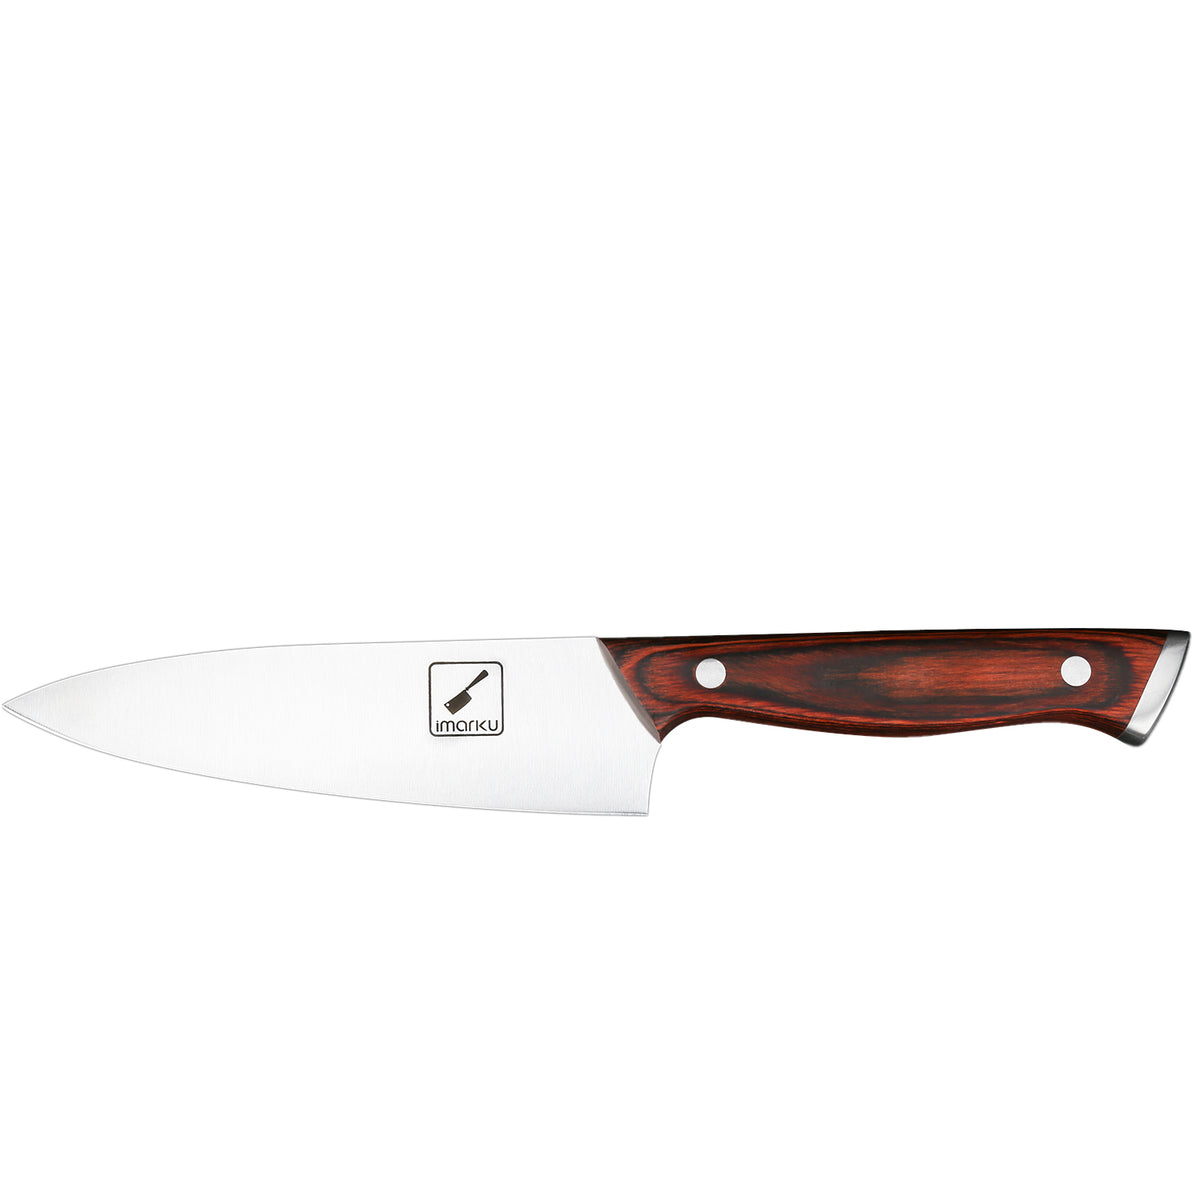 6" Chef Knife